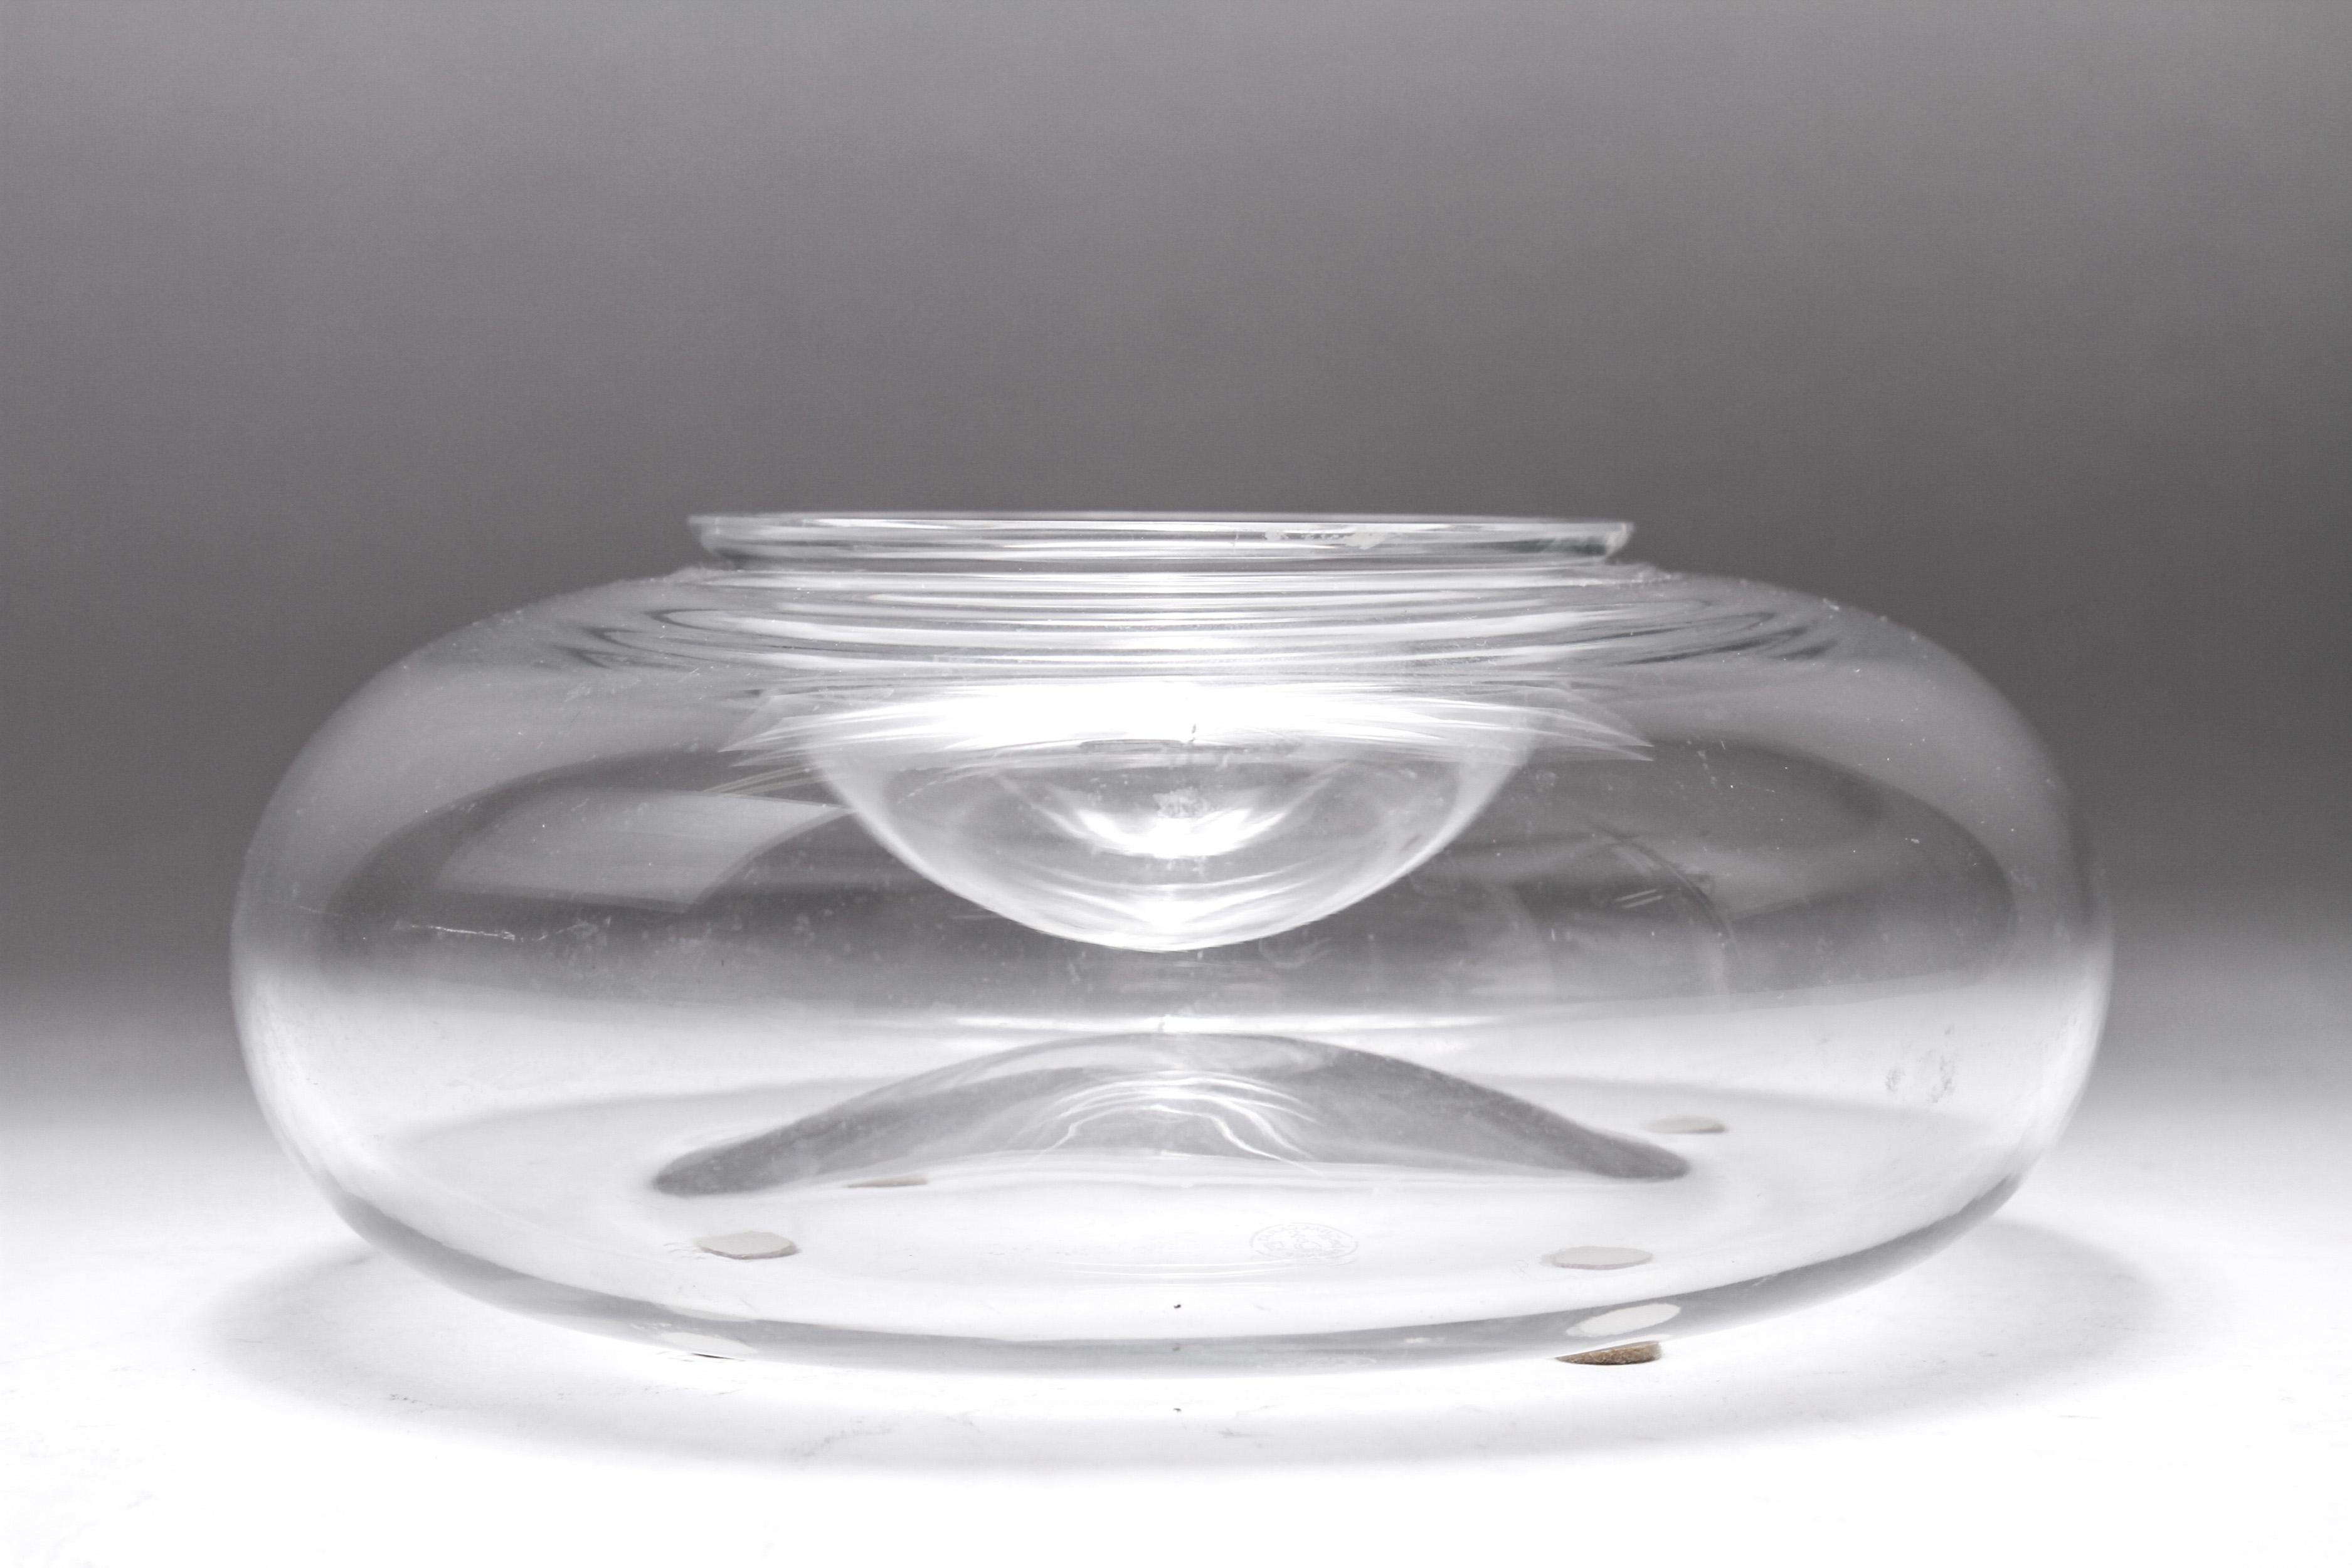 French modern crystal caviar dish or bowl made by Baccarat. The piece has a removable upper tray placed on a larger lower bowl. Acid-etched maker's mark to the underside. In great vintage condition with age-appropriate wear and use.